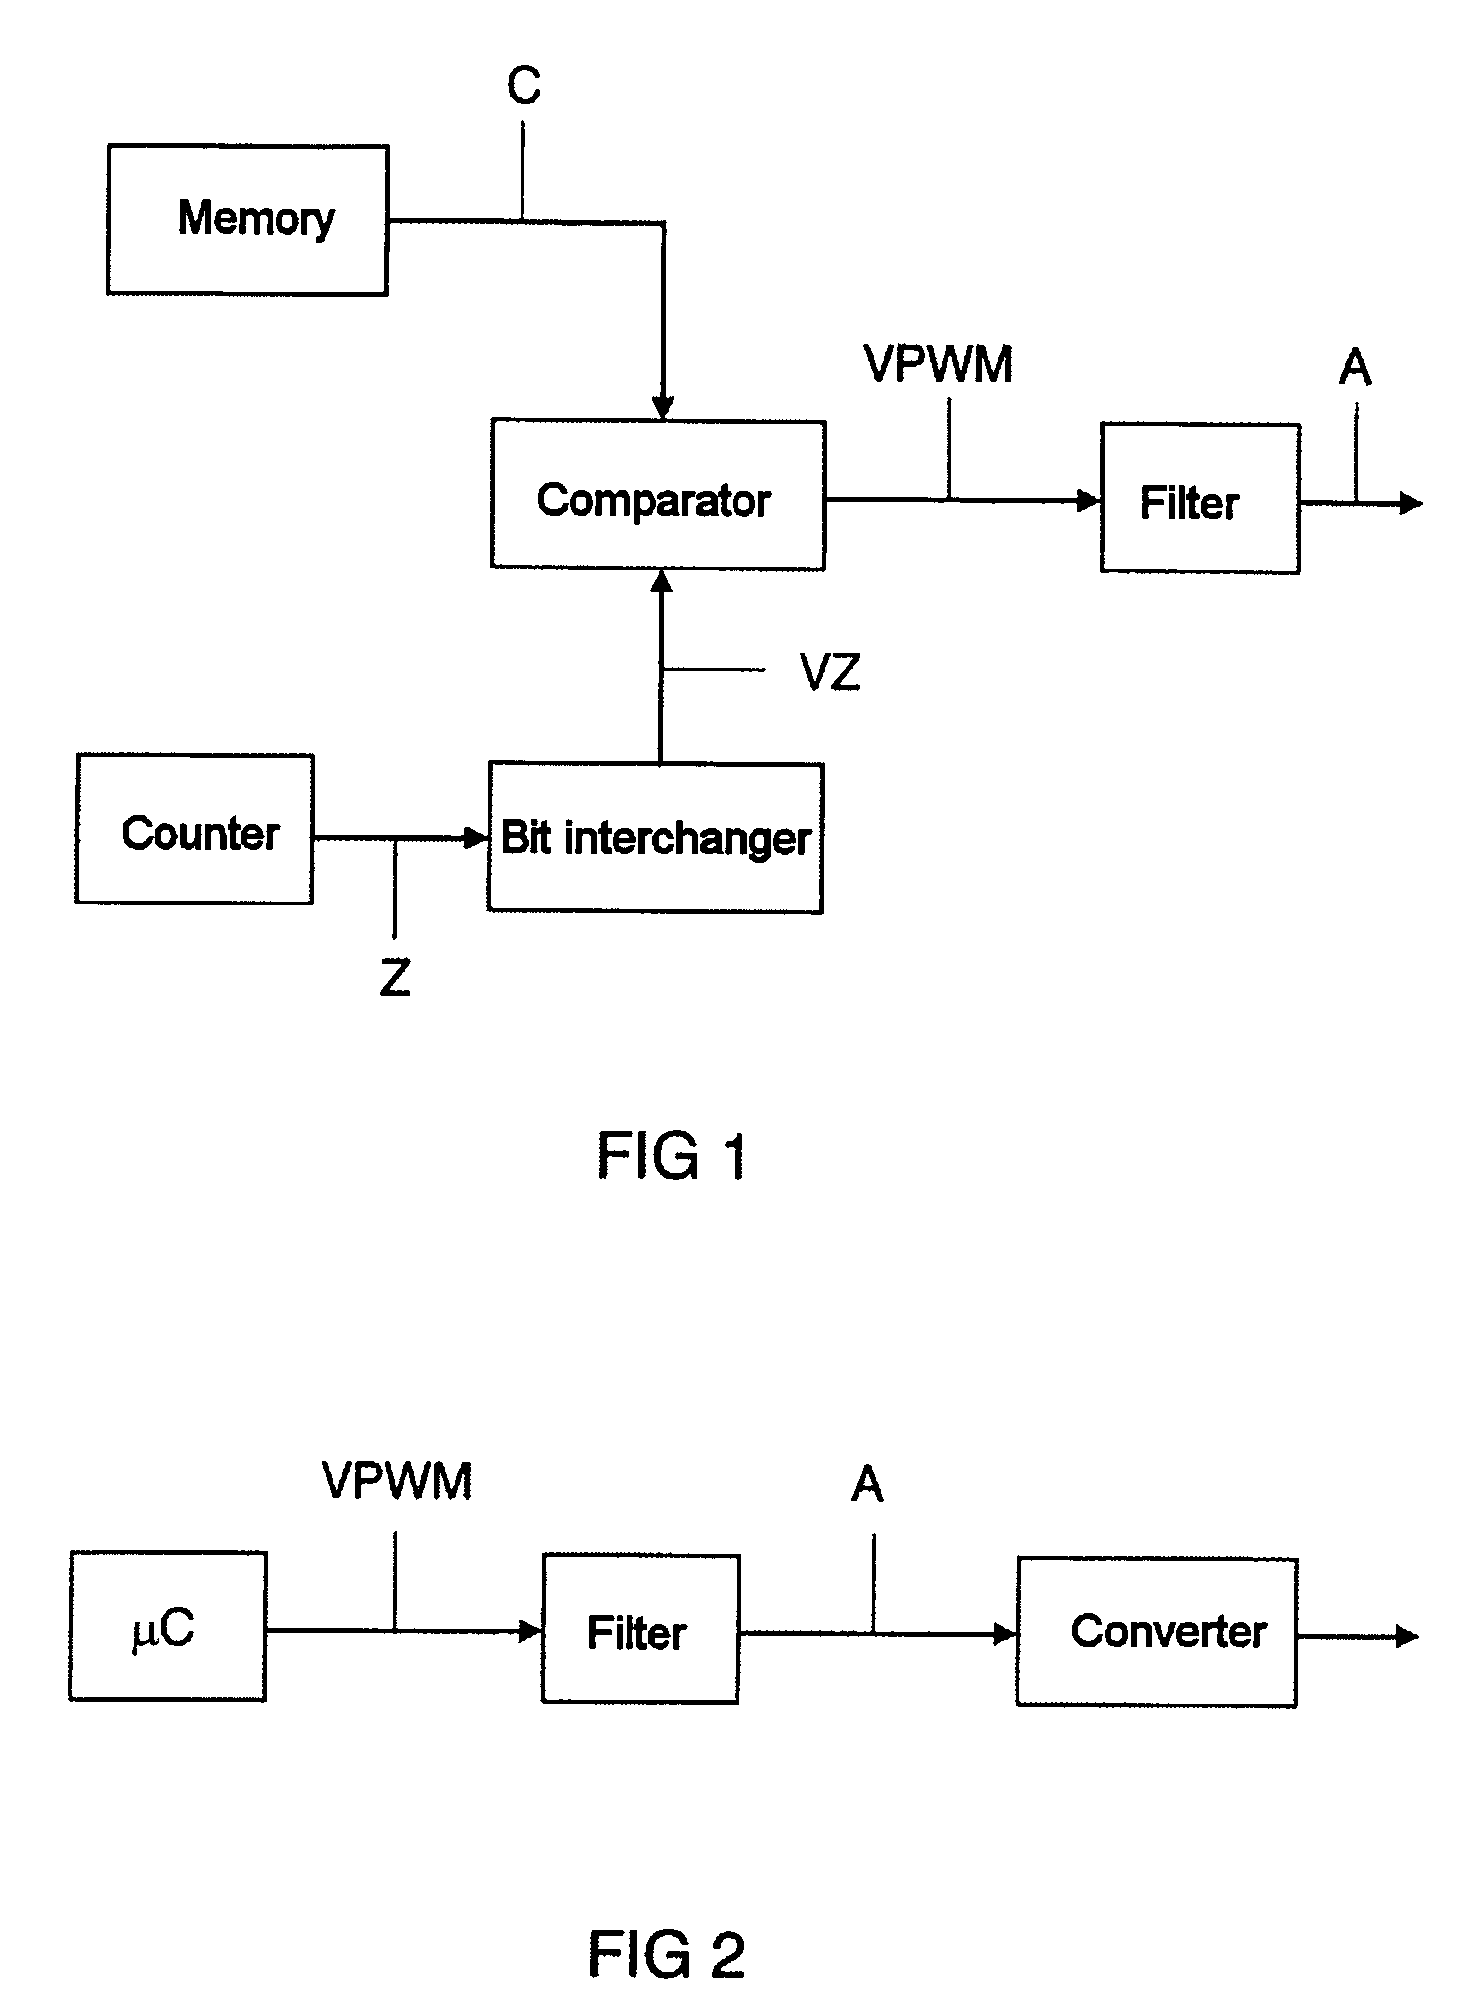 Digital-to-analog conversion with an interleaved, pulse-width modulated signal